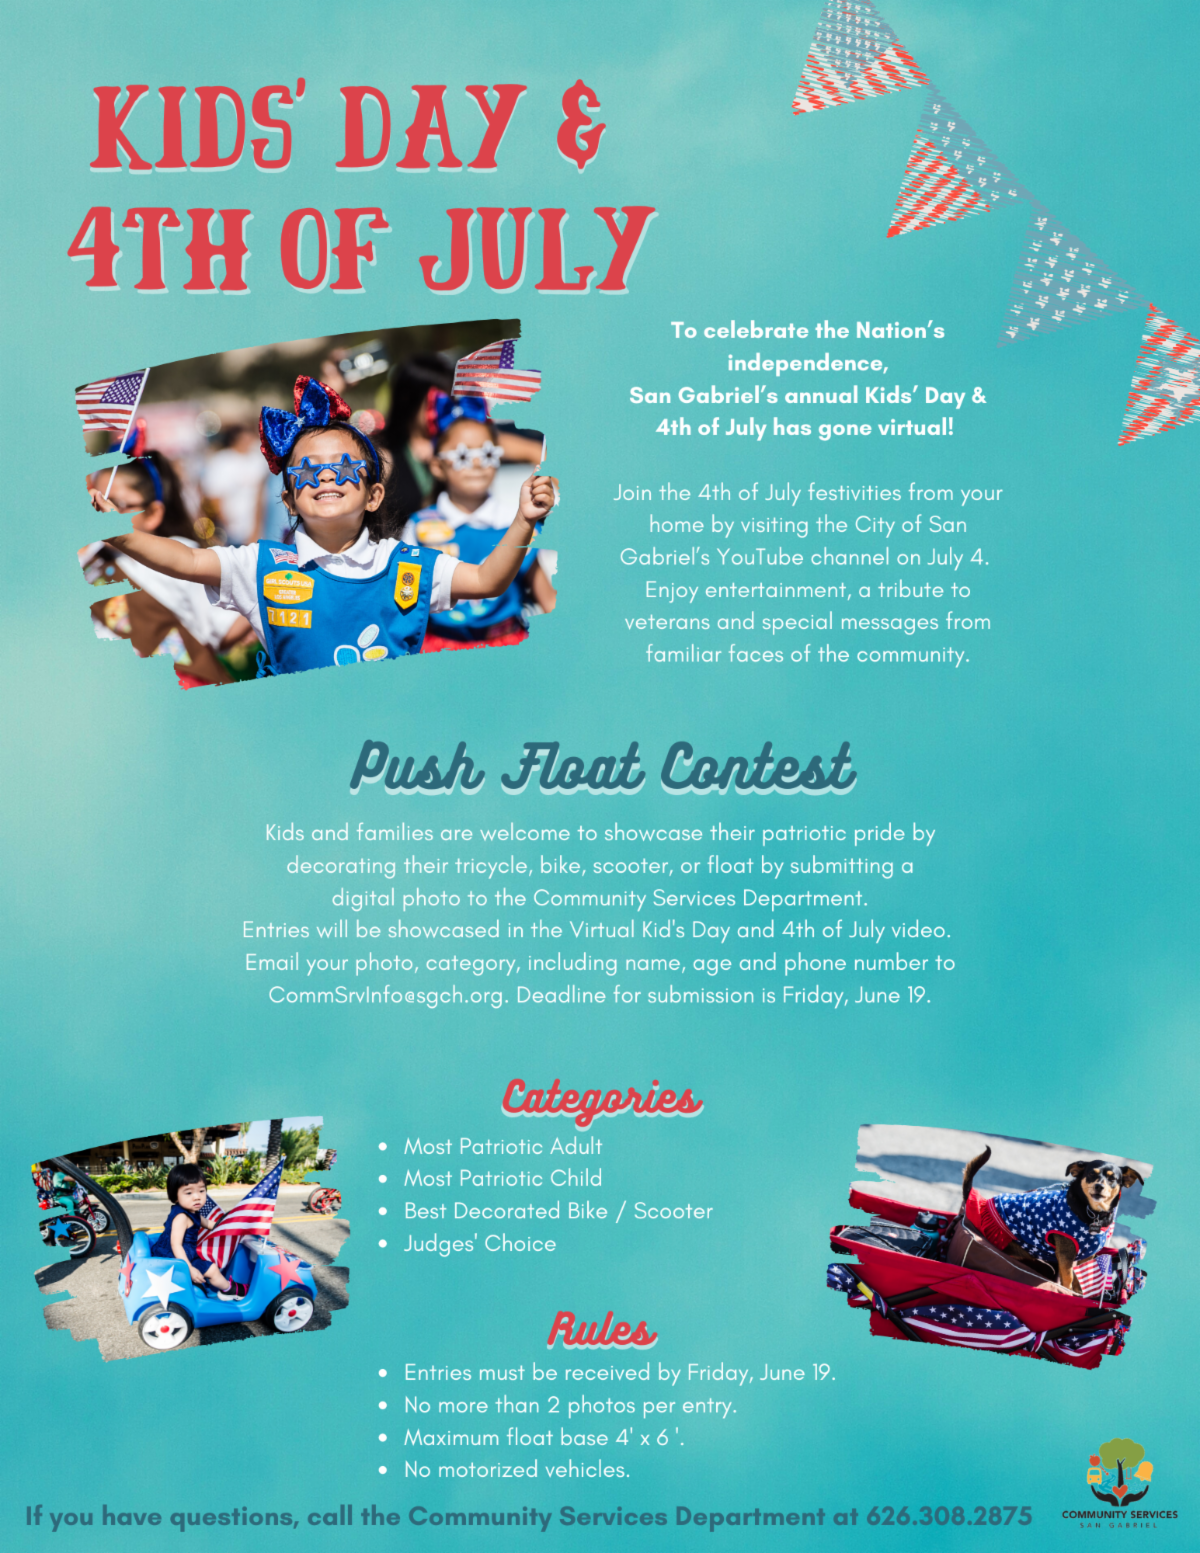 Kids' Day & 4th of July Flyer, Patriotic design and pictures of children in festive clothes and a dog on a decorated wagon.